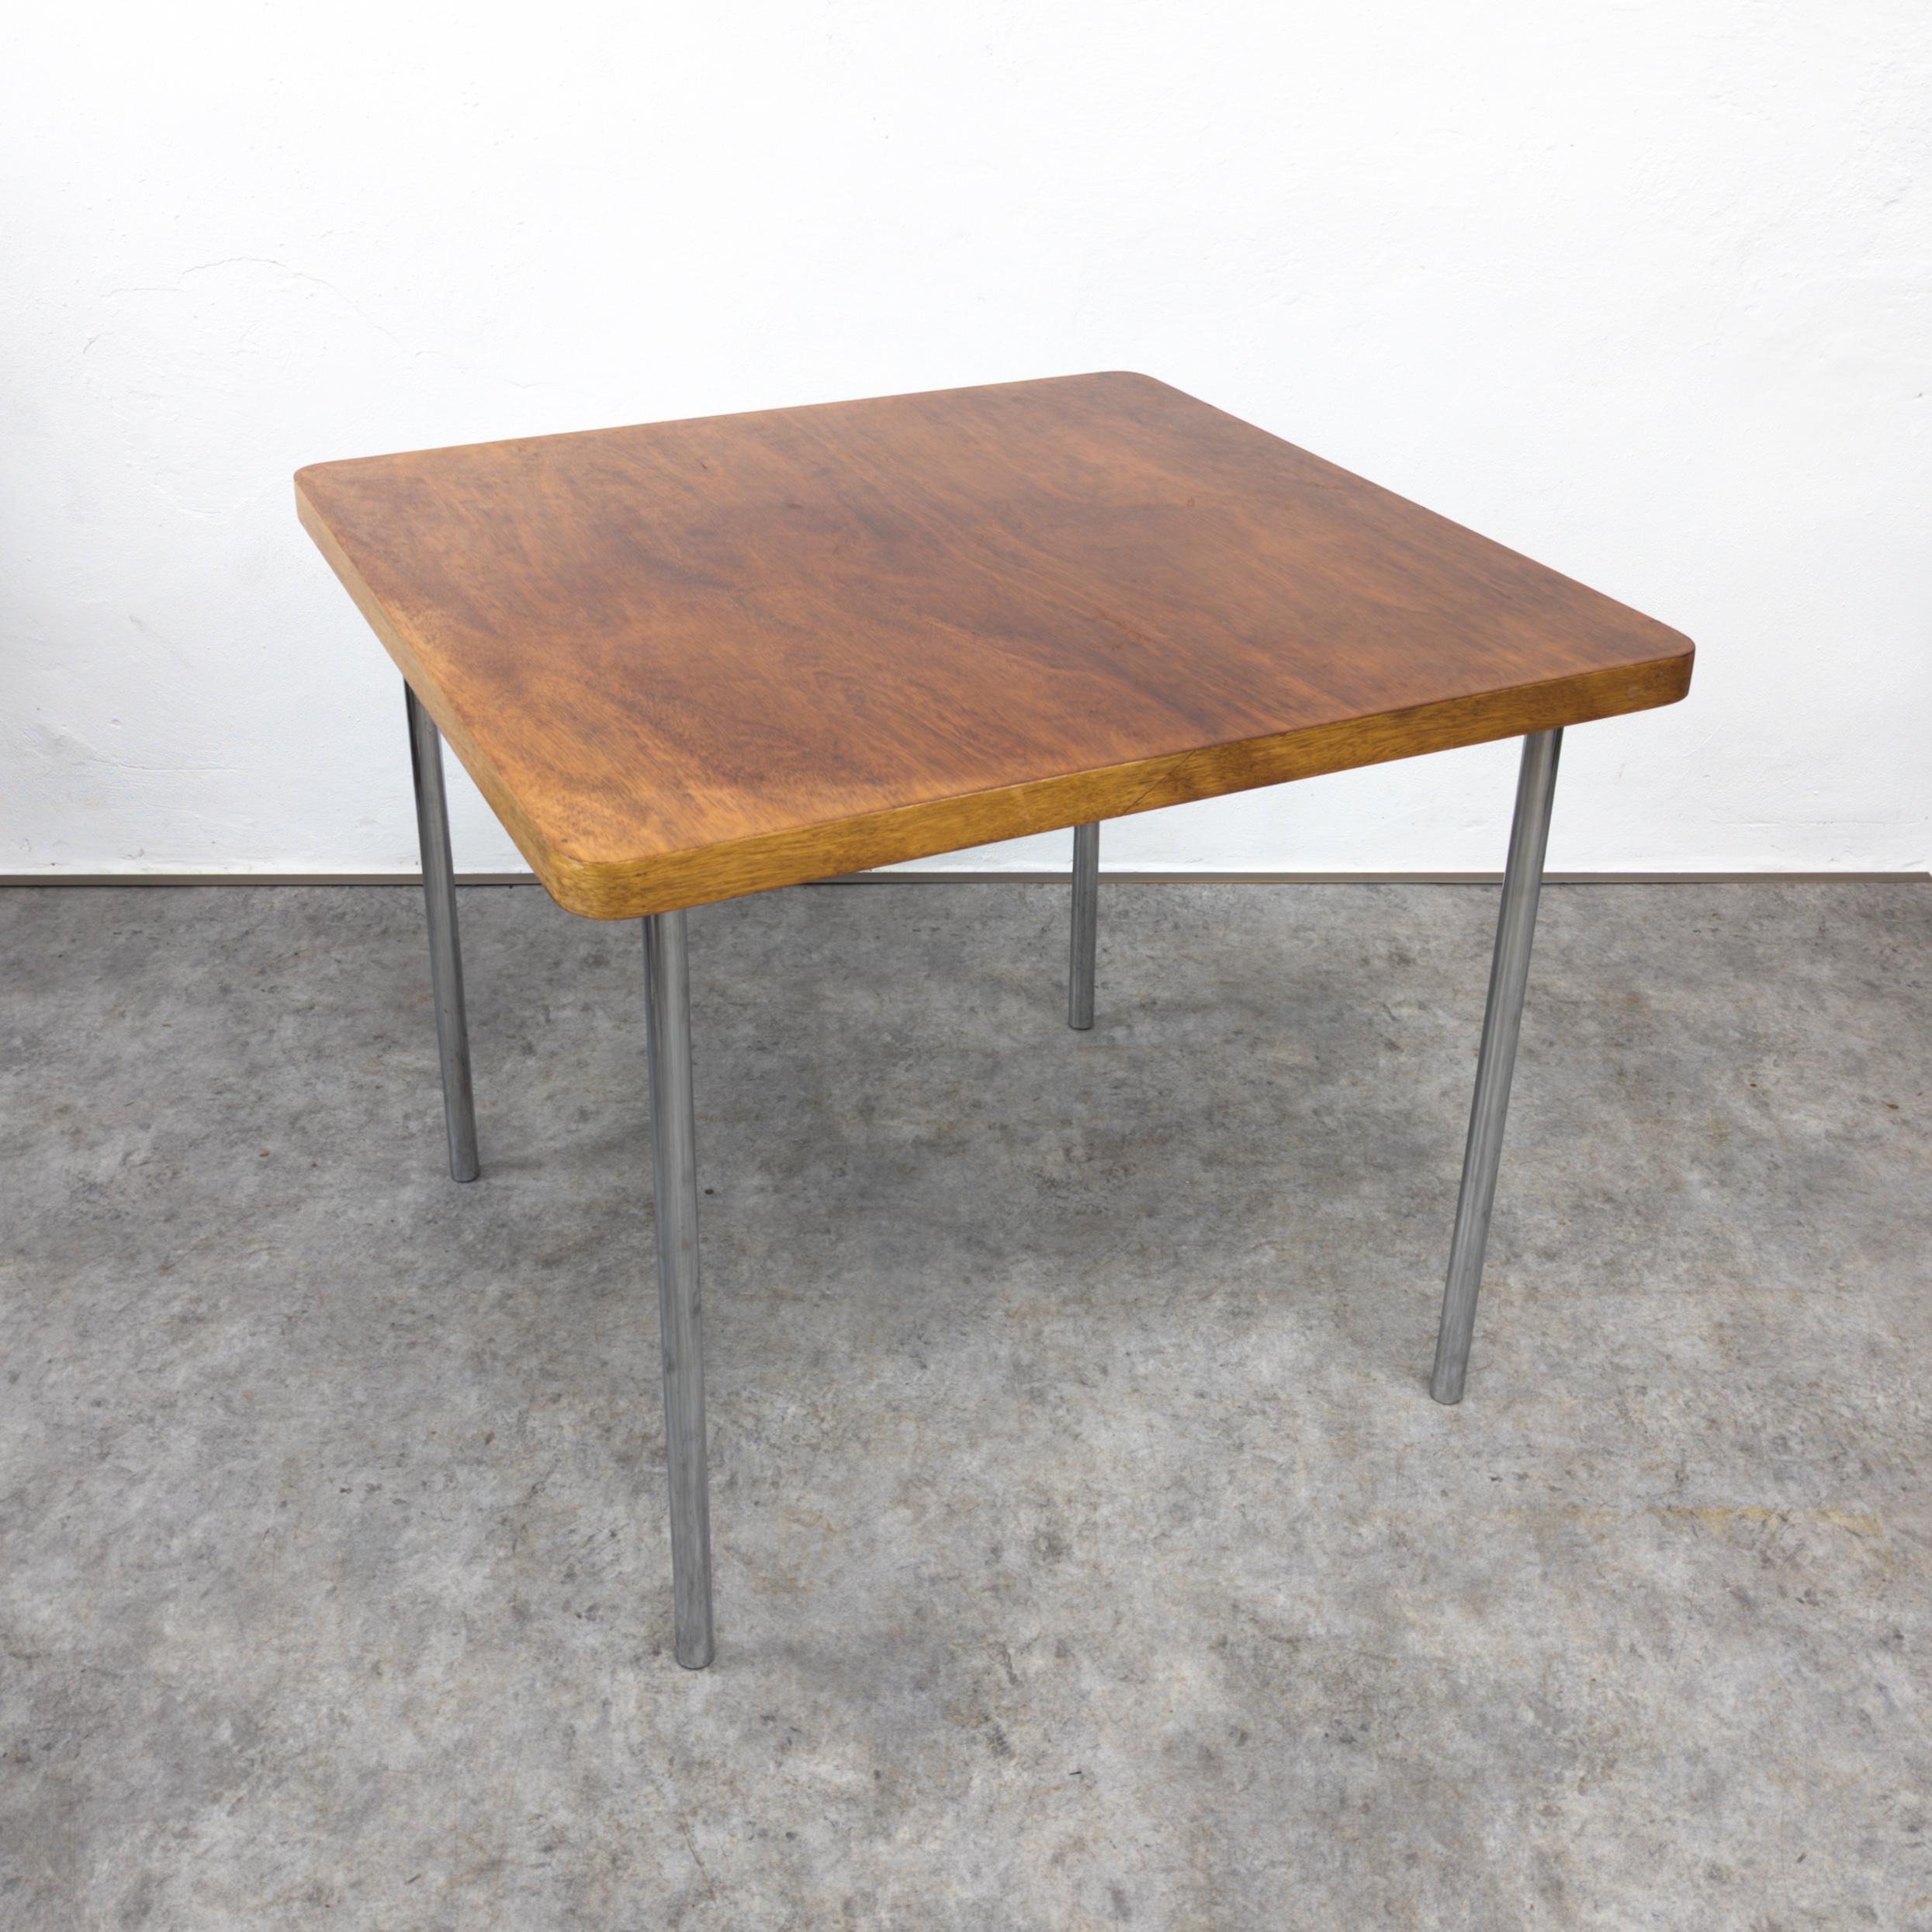 Rare Bauhaus dining table Thonet B 14 by Marcel Breuer  For Sale 3